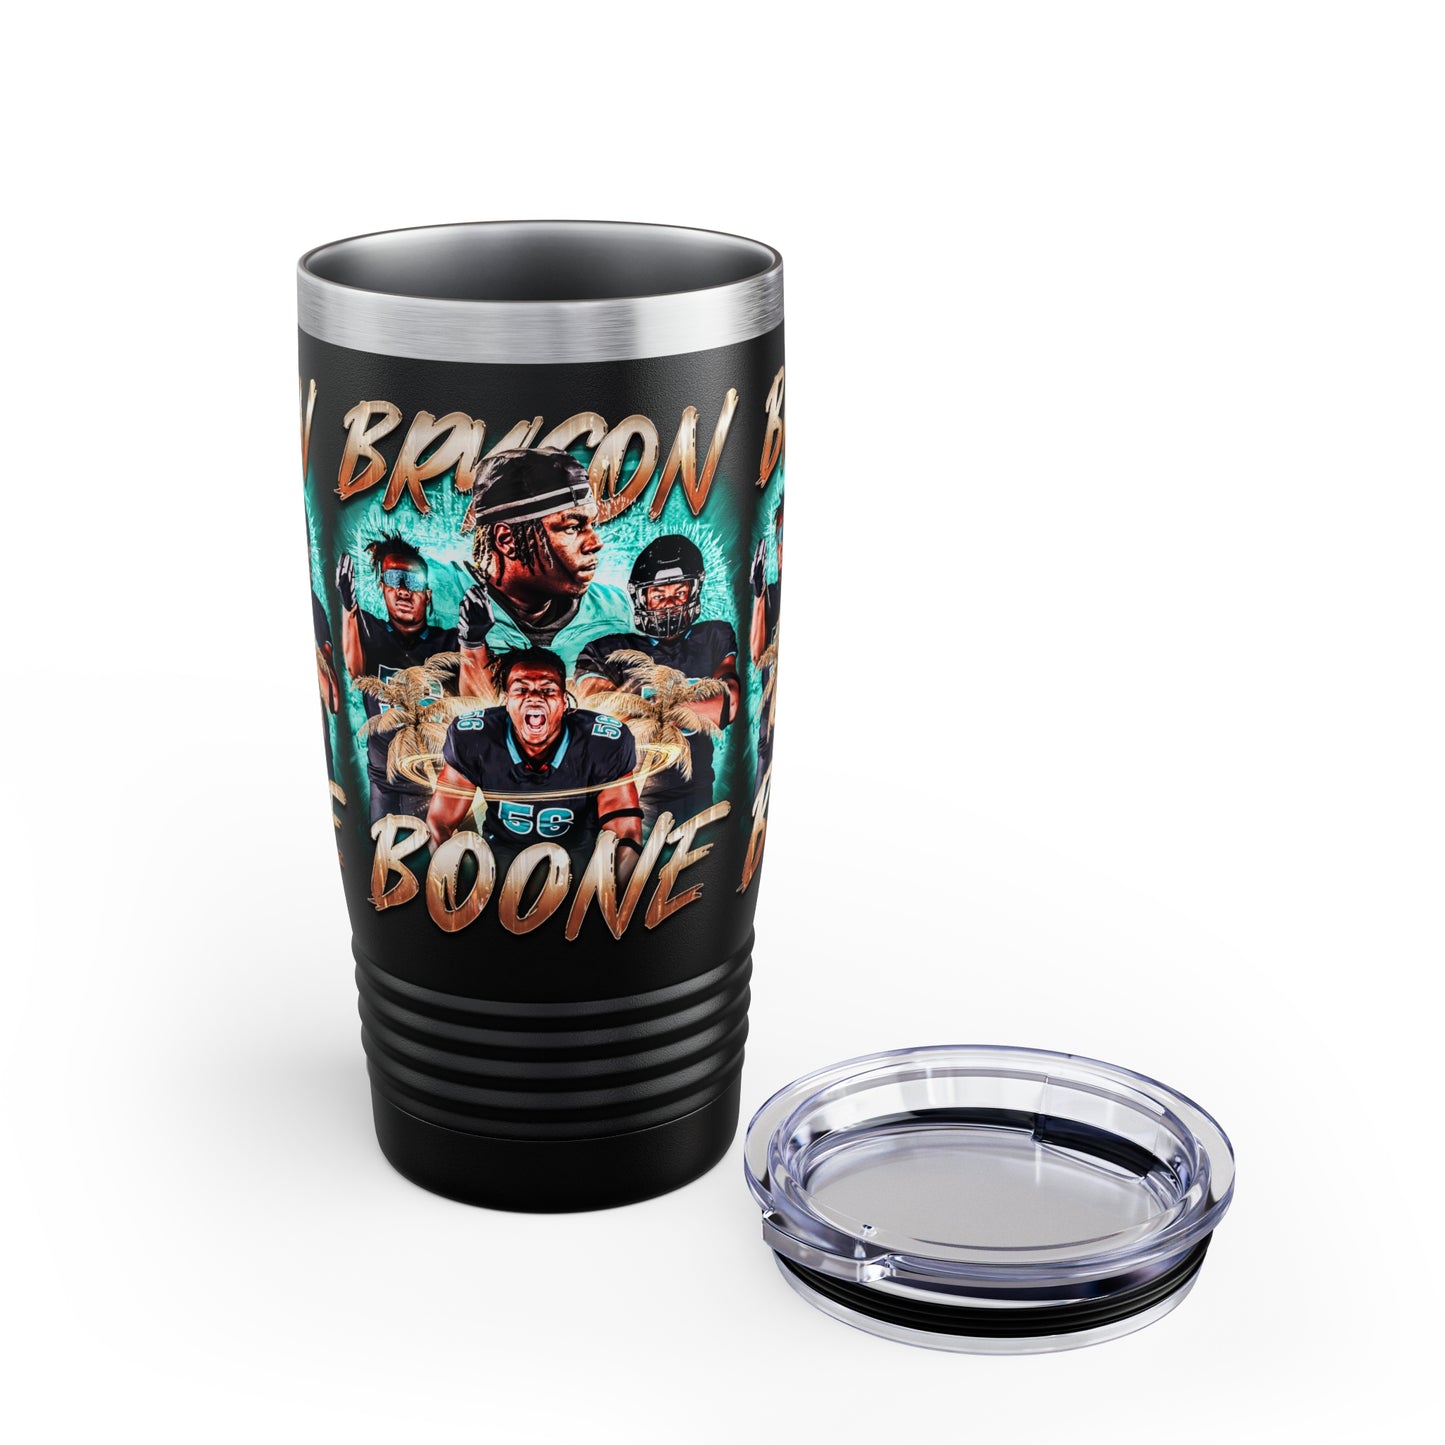 BRYSON BOONE STAINLESS STEEL TUMBLER